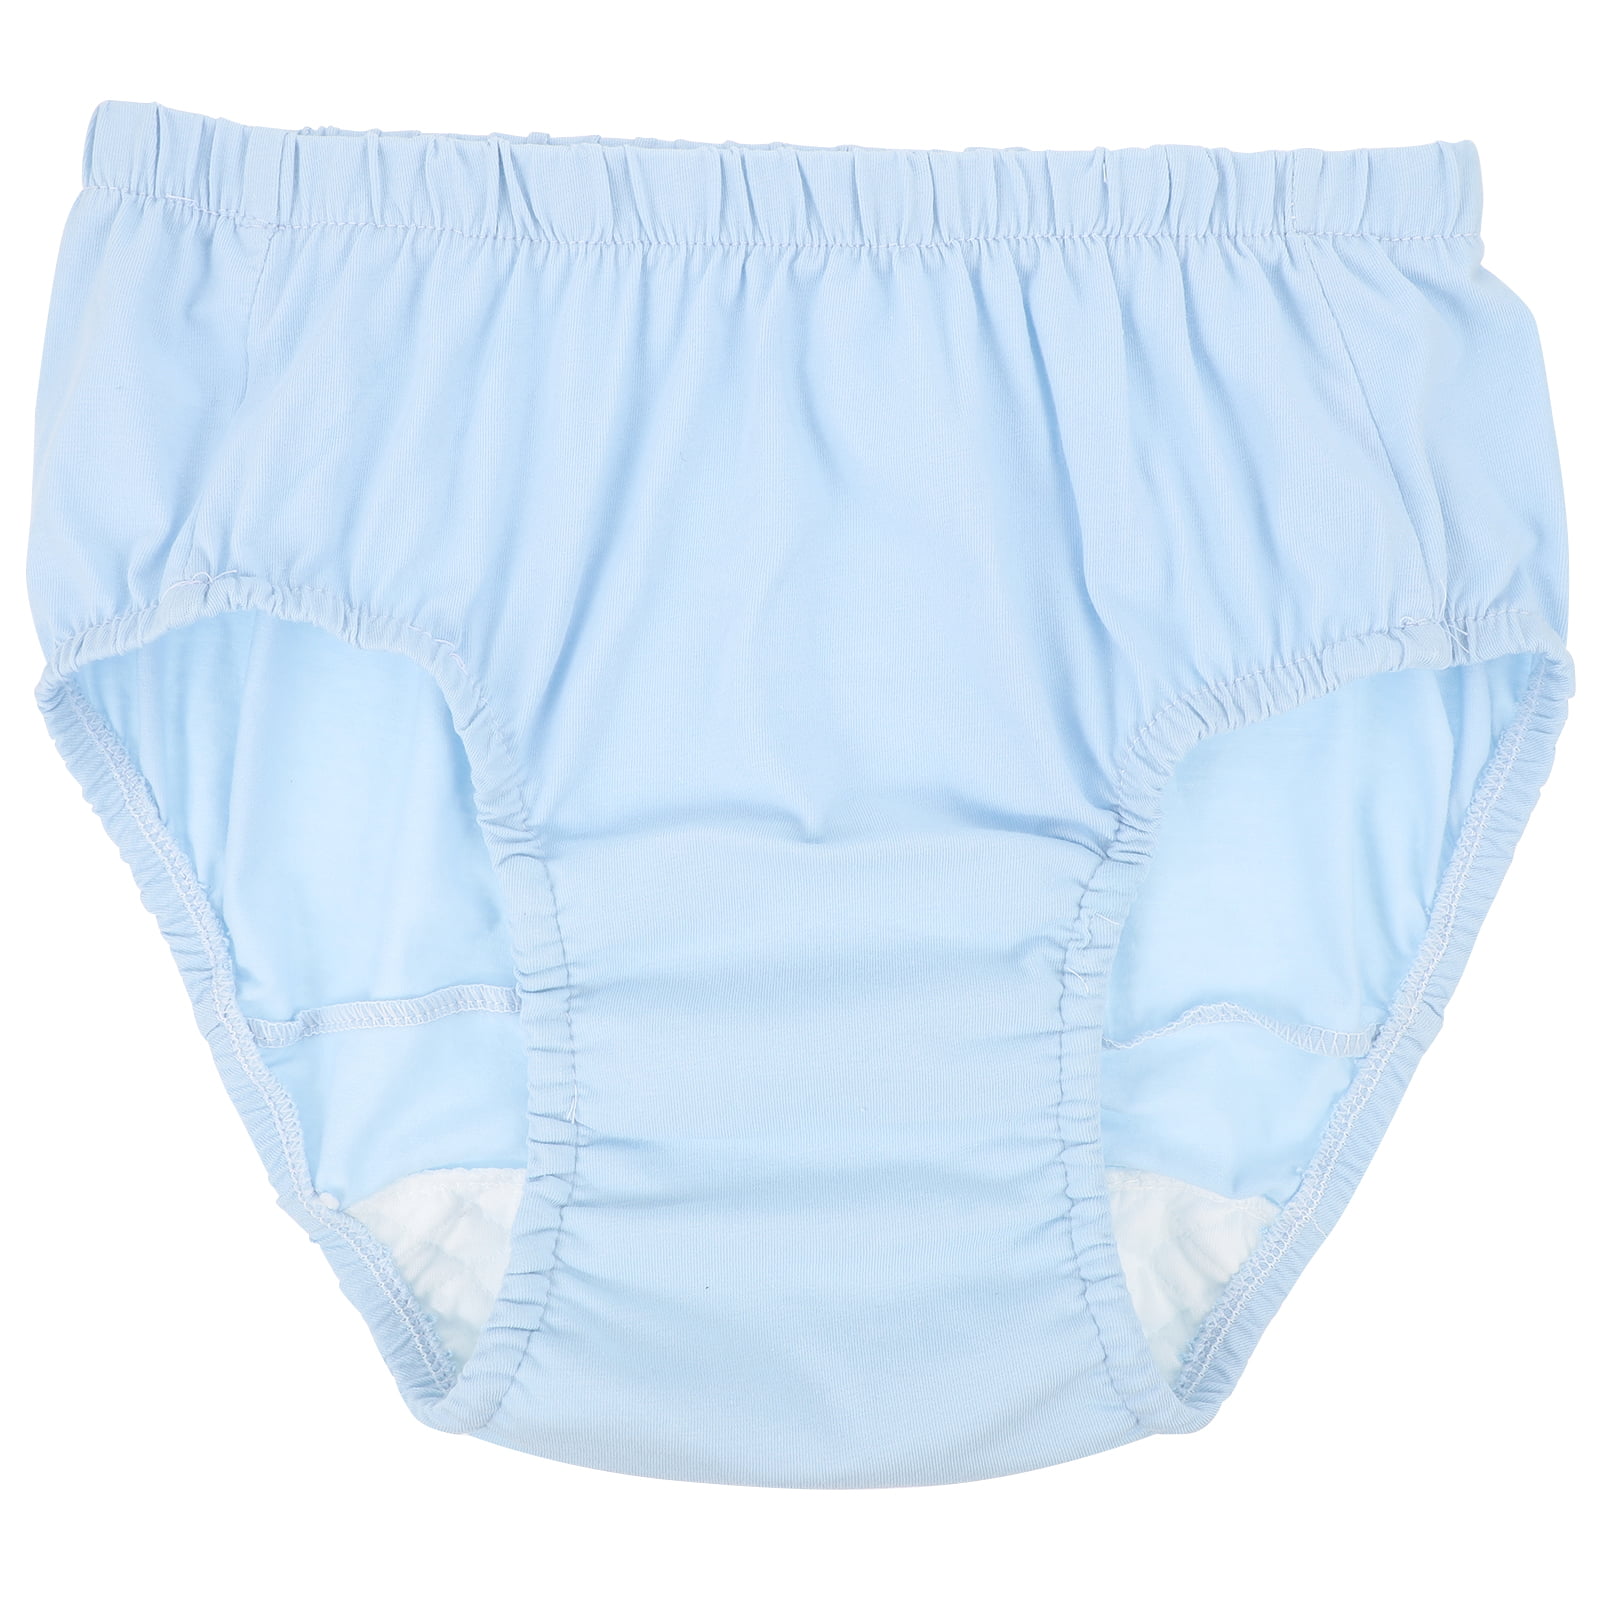 1Pc Reusable Uroclepsia Diaper Incontinence Urinary Underwear for ...